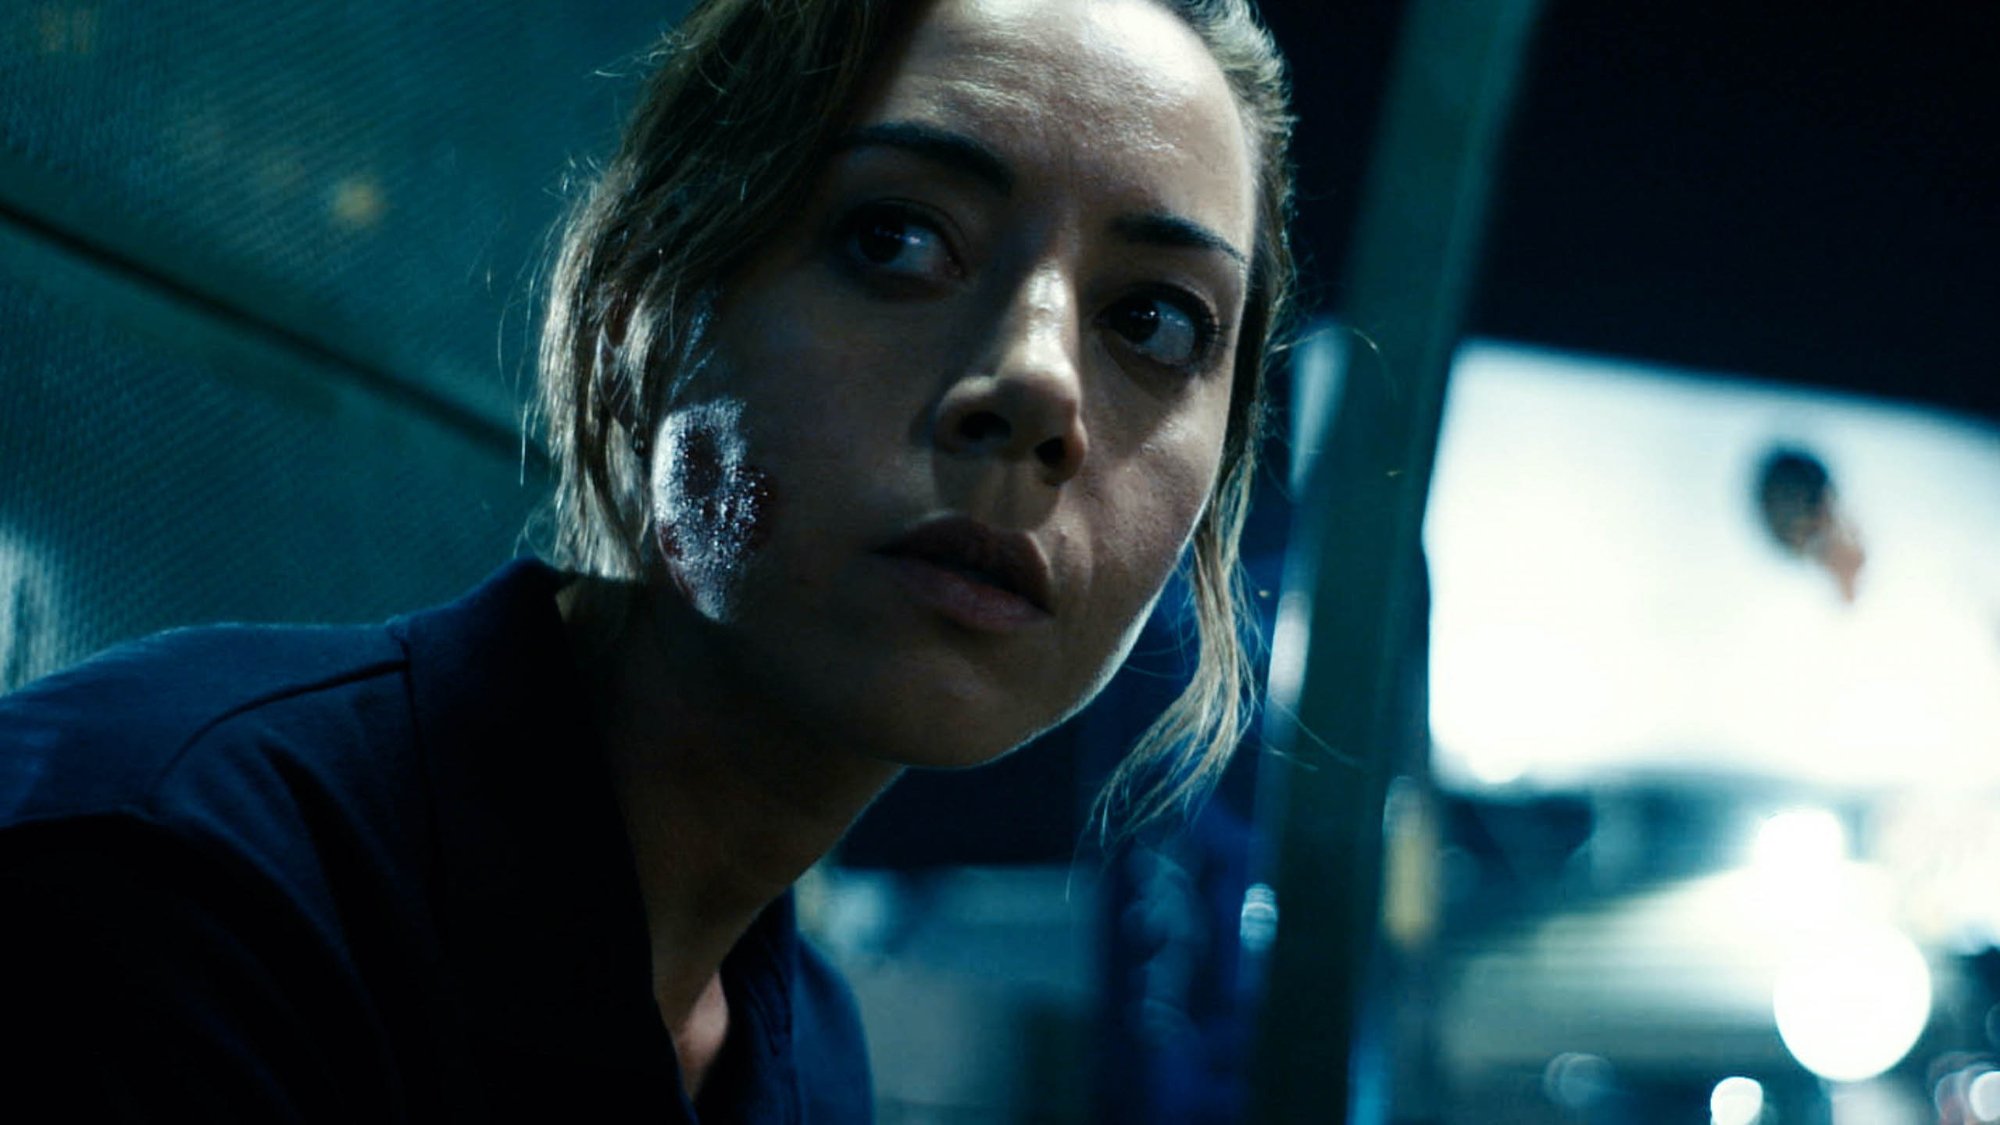 'Emily the Criminal' Aubrey Plaza as Emily with blood on her cheek